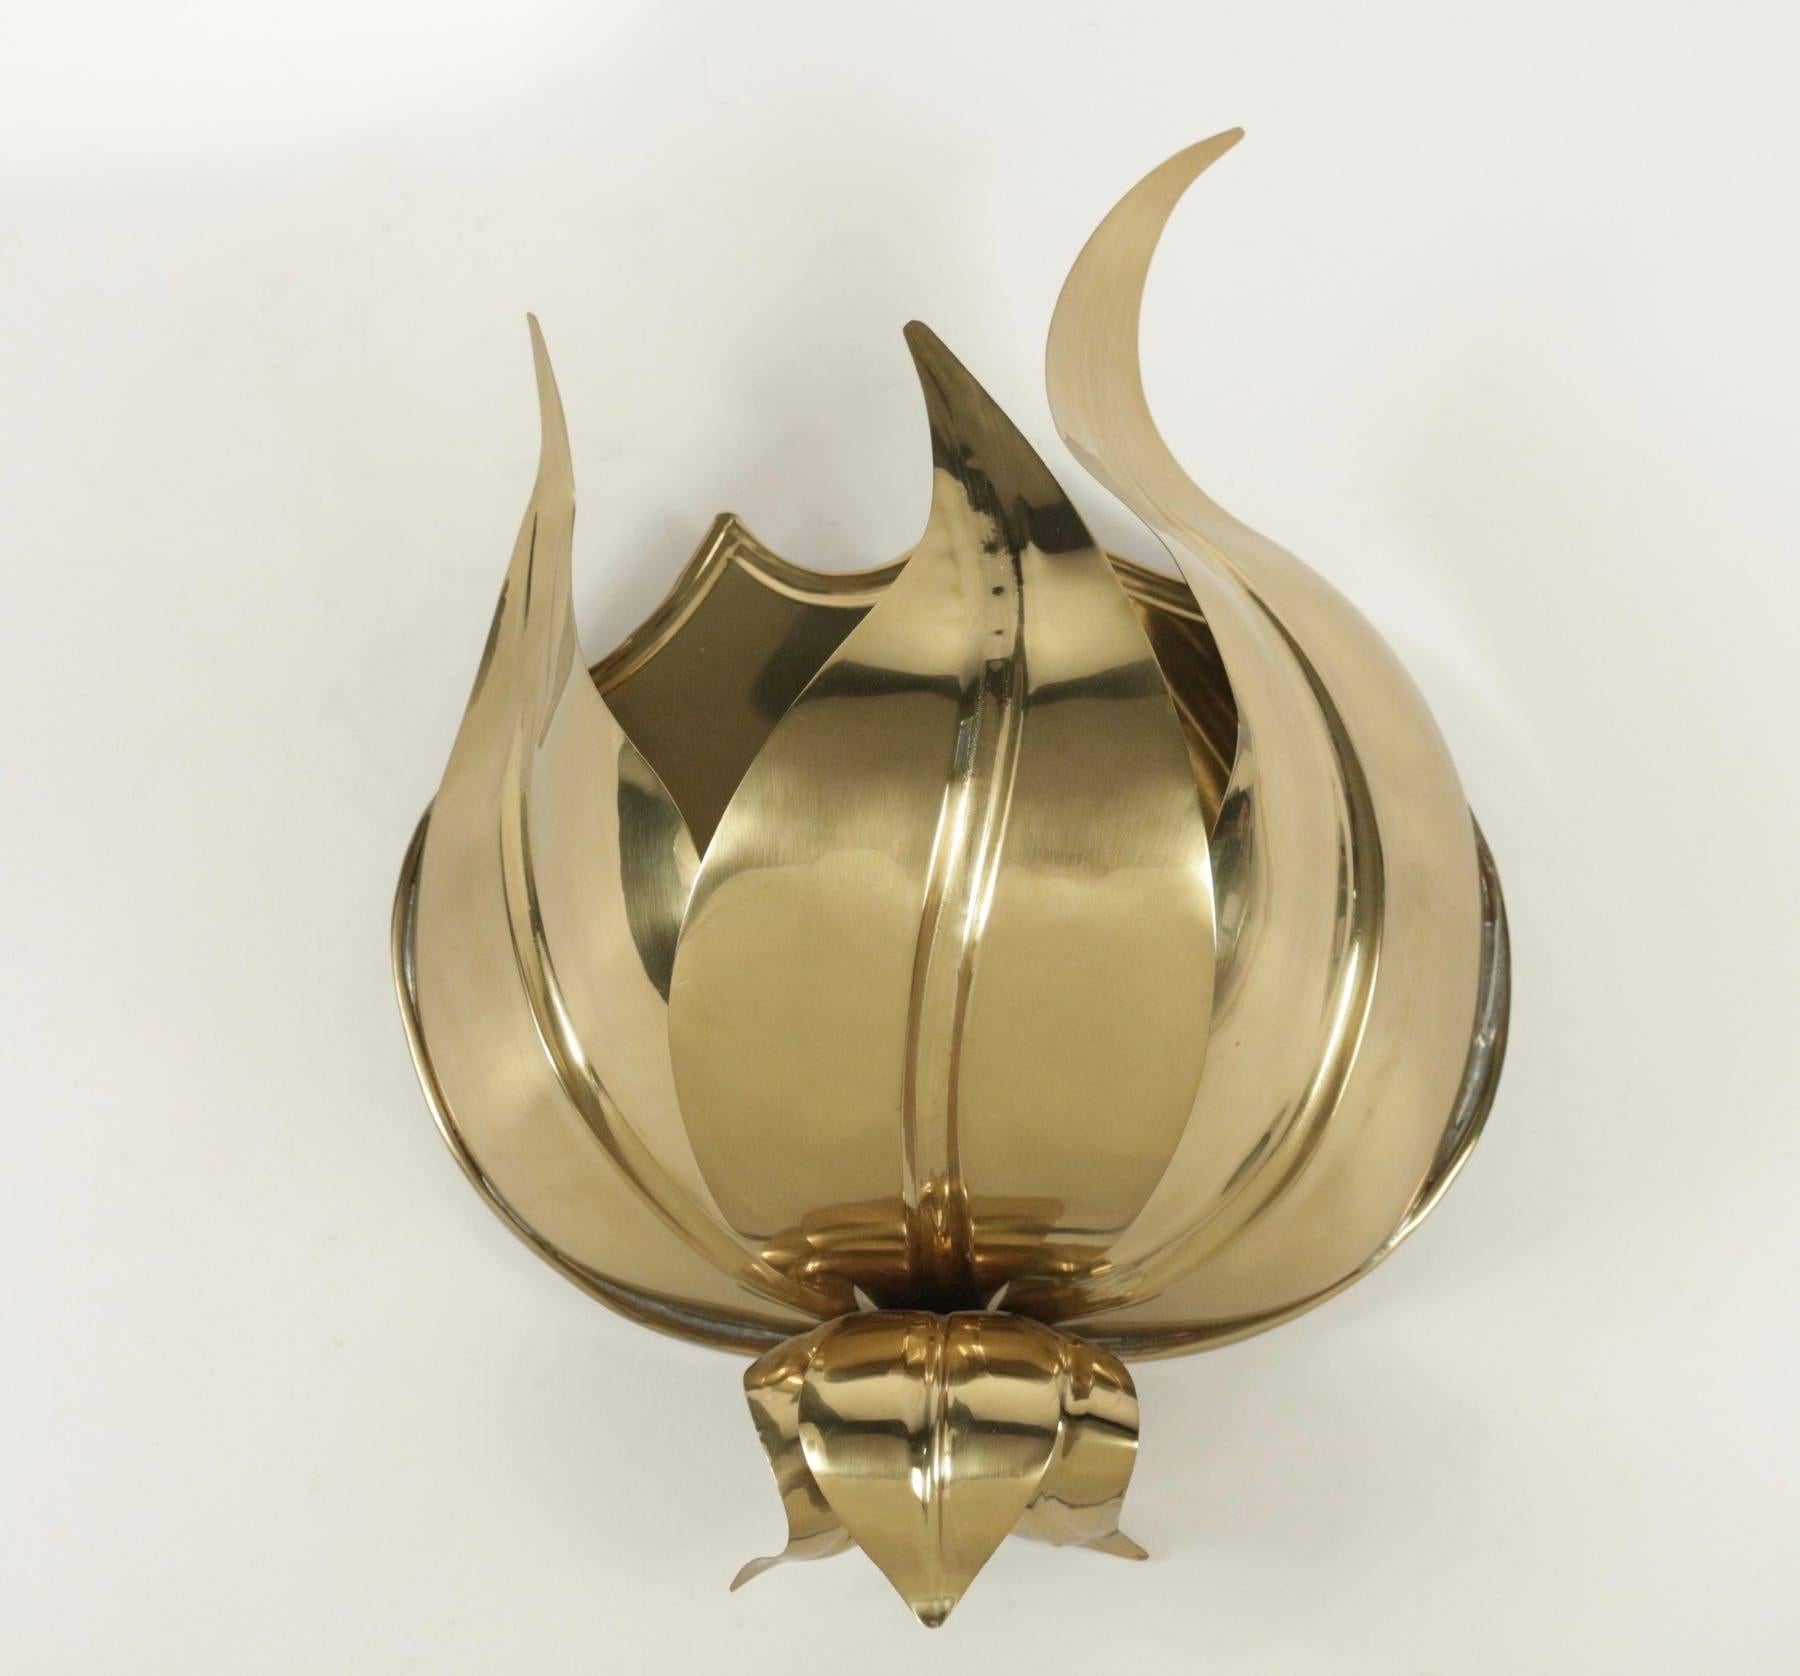 The sconces consist of three large leaves with different heights of veins in gilded brass that form a stylized flower.
On the lower part, a decoration of 3 small inverted leaves gives charm to the sconce.
2 bulbs per sconce.

 